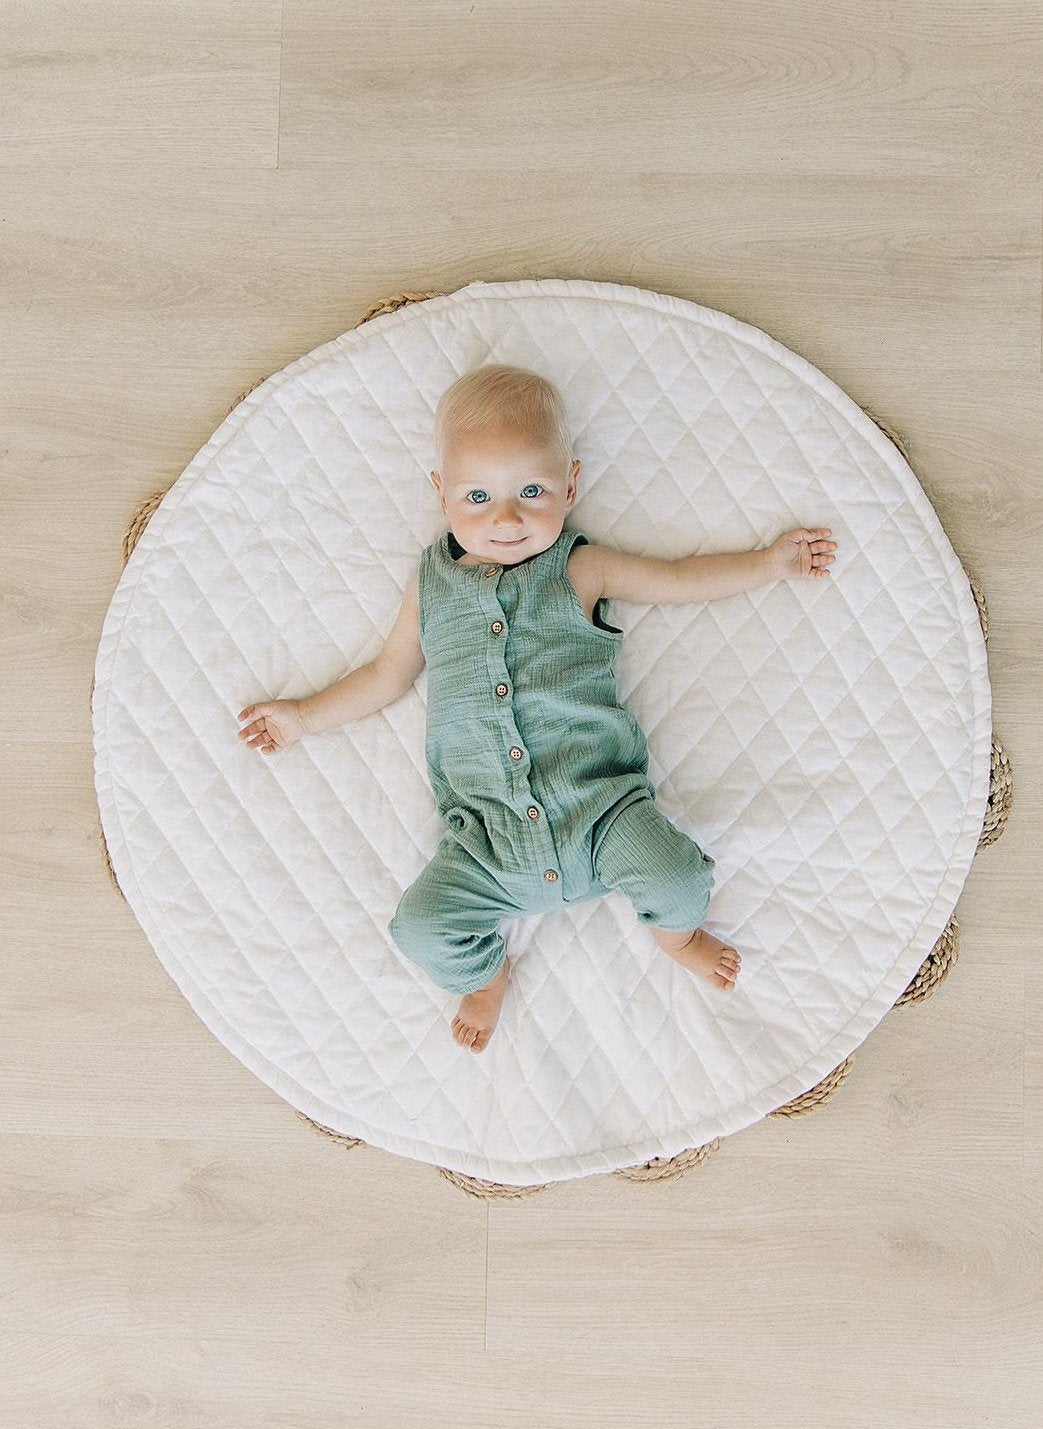 Our Favorite Vintage Baby Name Ideas